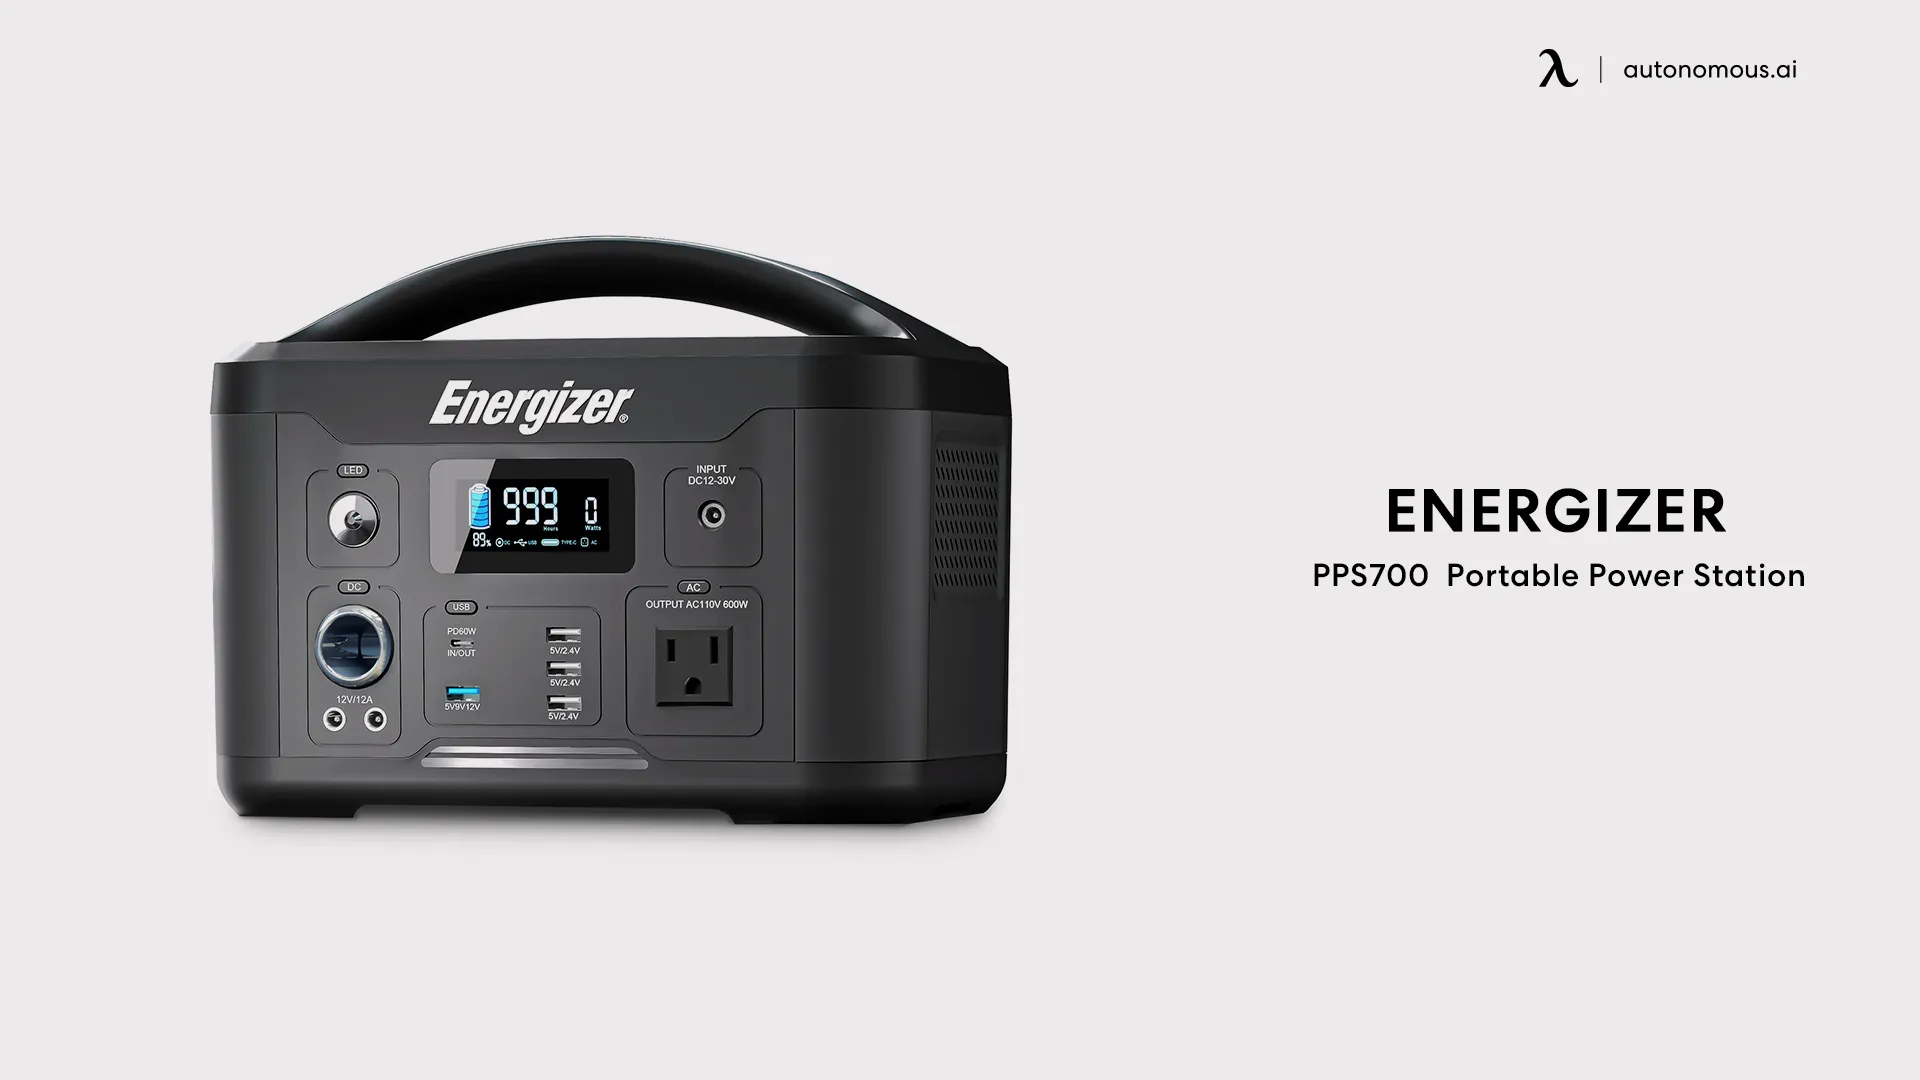 Energizer PPS700 portable power station